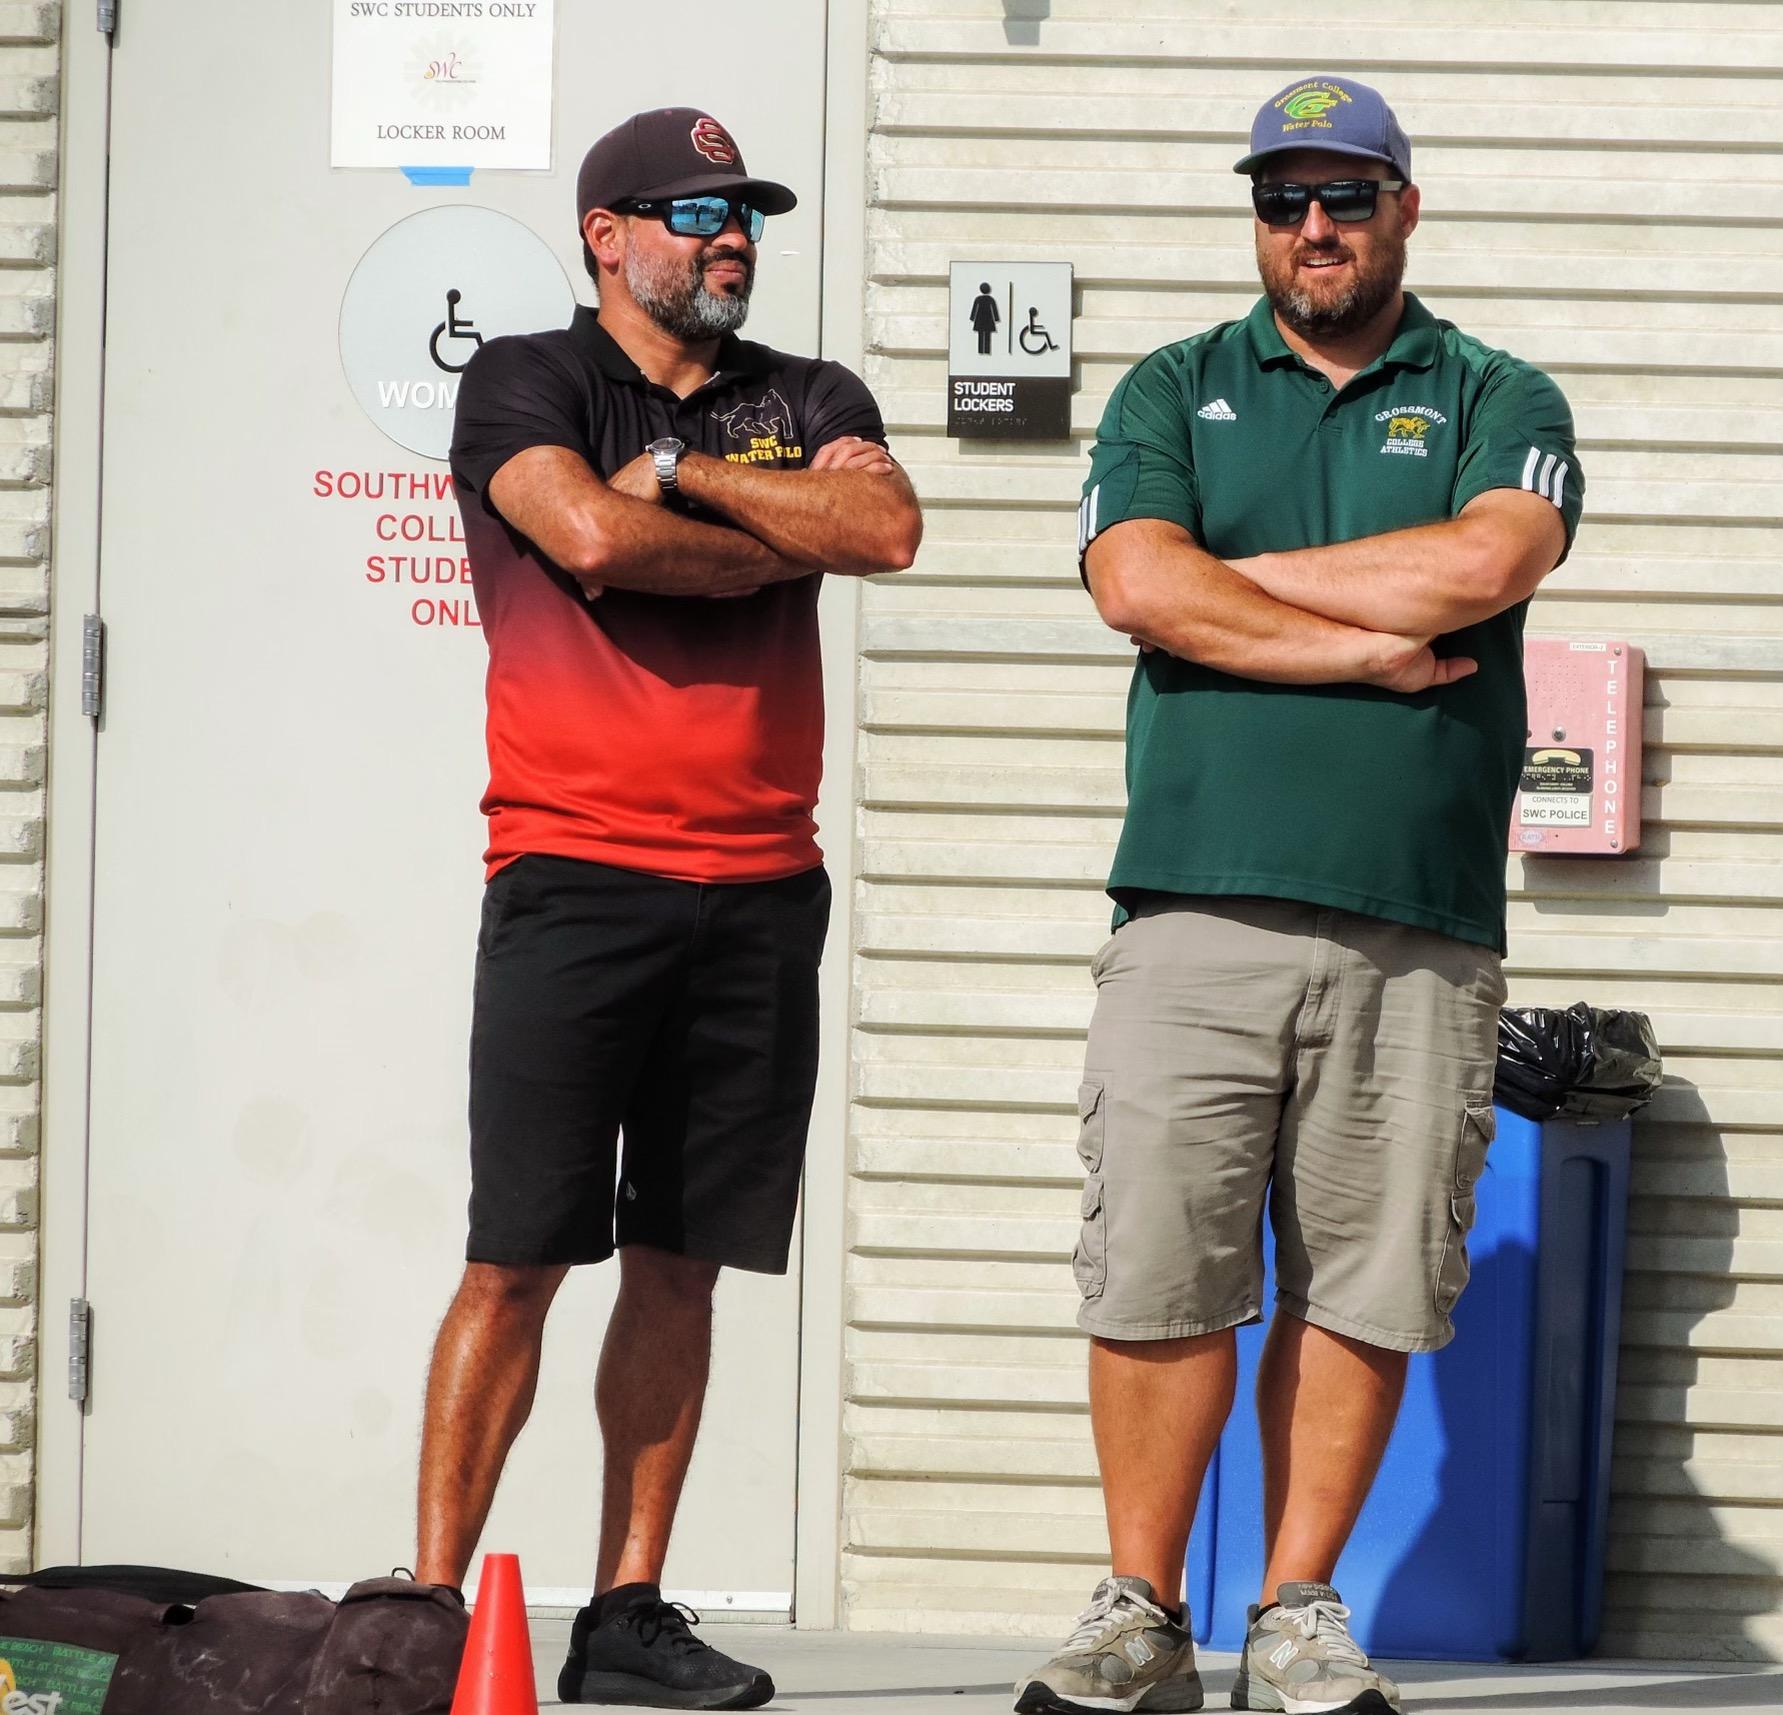 Southwestern Coach Jorge Perez (Griffin Alum) and Grossmont Coach Tyrent Lackey talking prior to today's match.  "Even SWC's coach picked Grossmont to play."